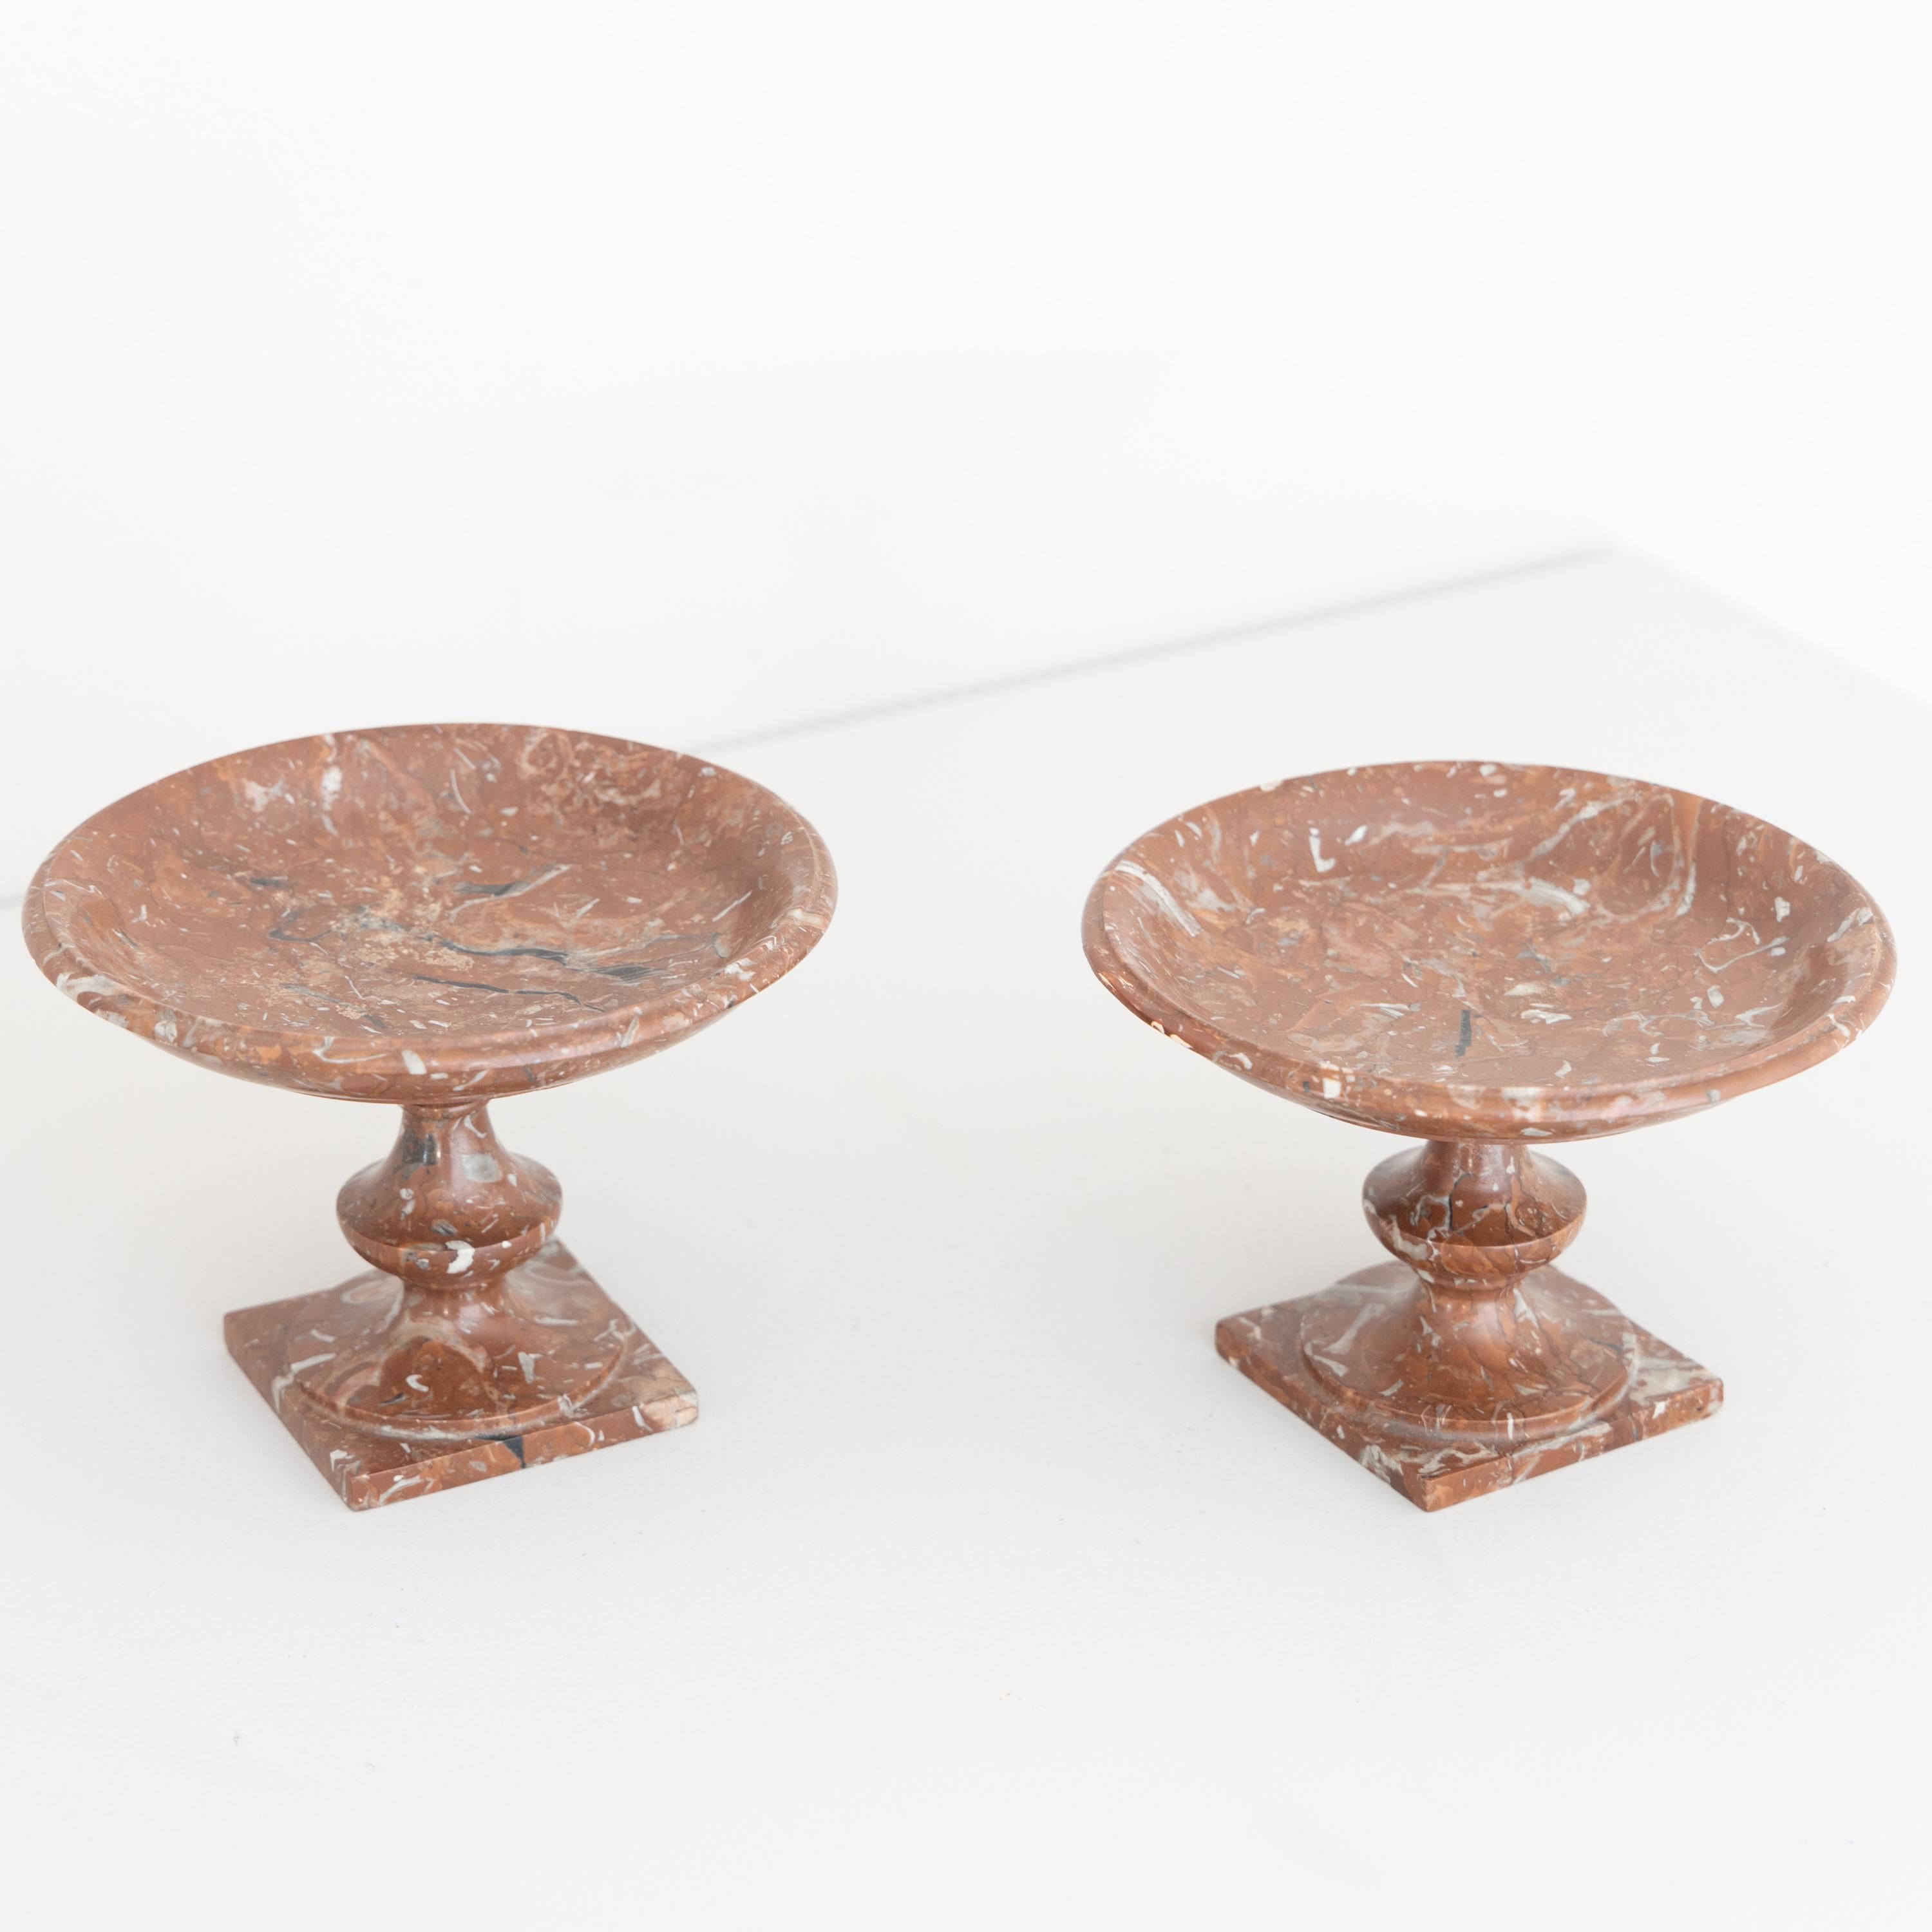 Two small red marble tazzas of slightly different design and height. Profiled vase-shaped shafts with shallow bowls rise above square plinths. One of the tazzas has an old restoration.